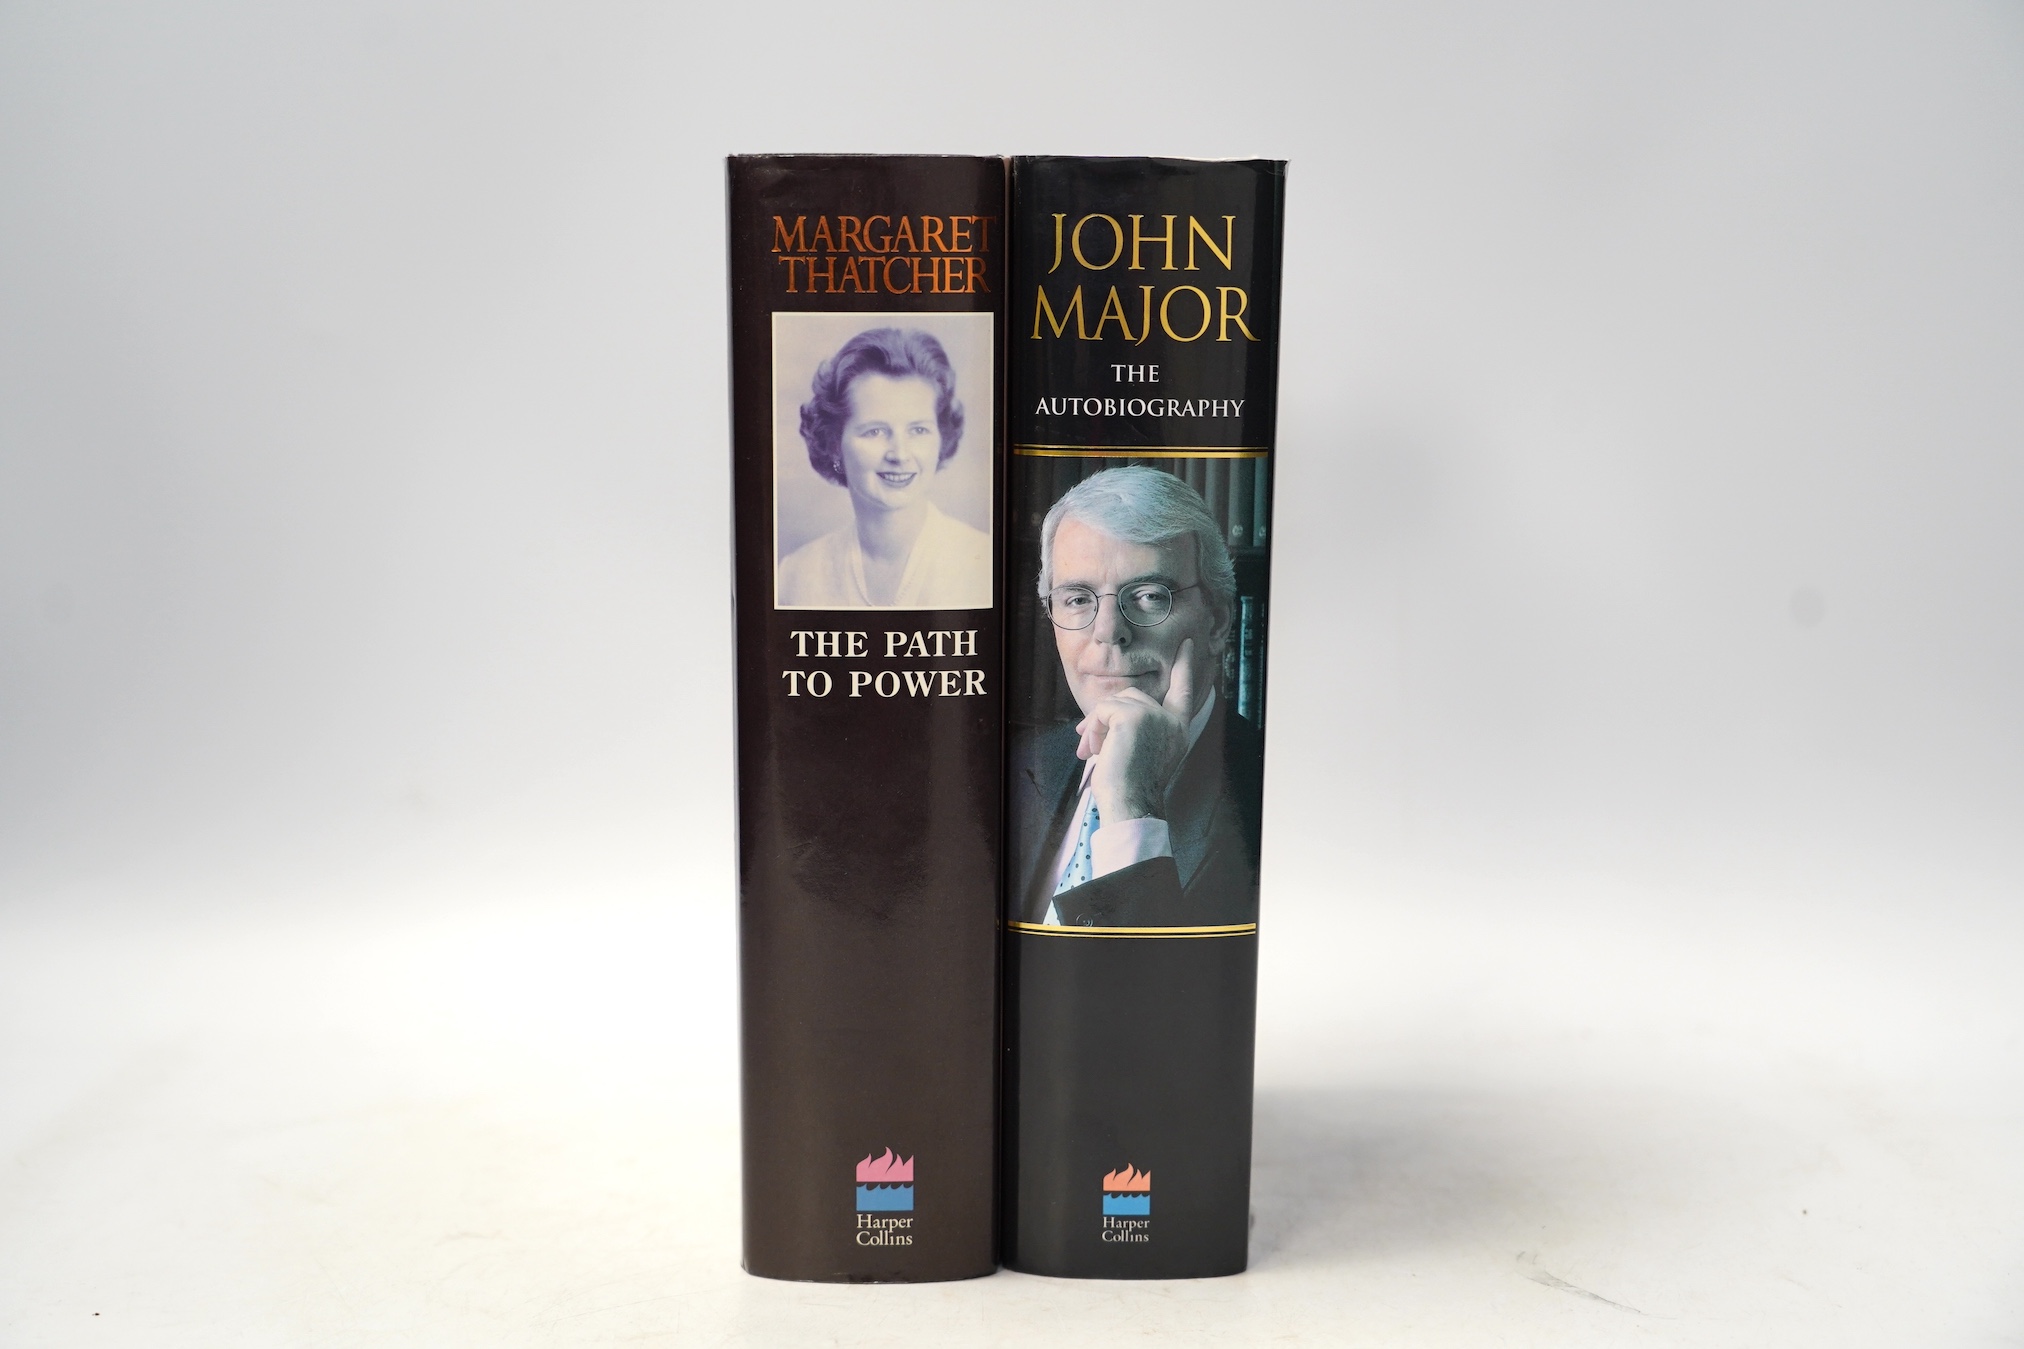 Thatcher , Margaret - The Path to Power. 1st edition (signed by the author on title), num. photo plates; publisher's cloth and d/wrapper,. 1995; Major, John - The Autobiography. 1st edition (short inscription by author o